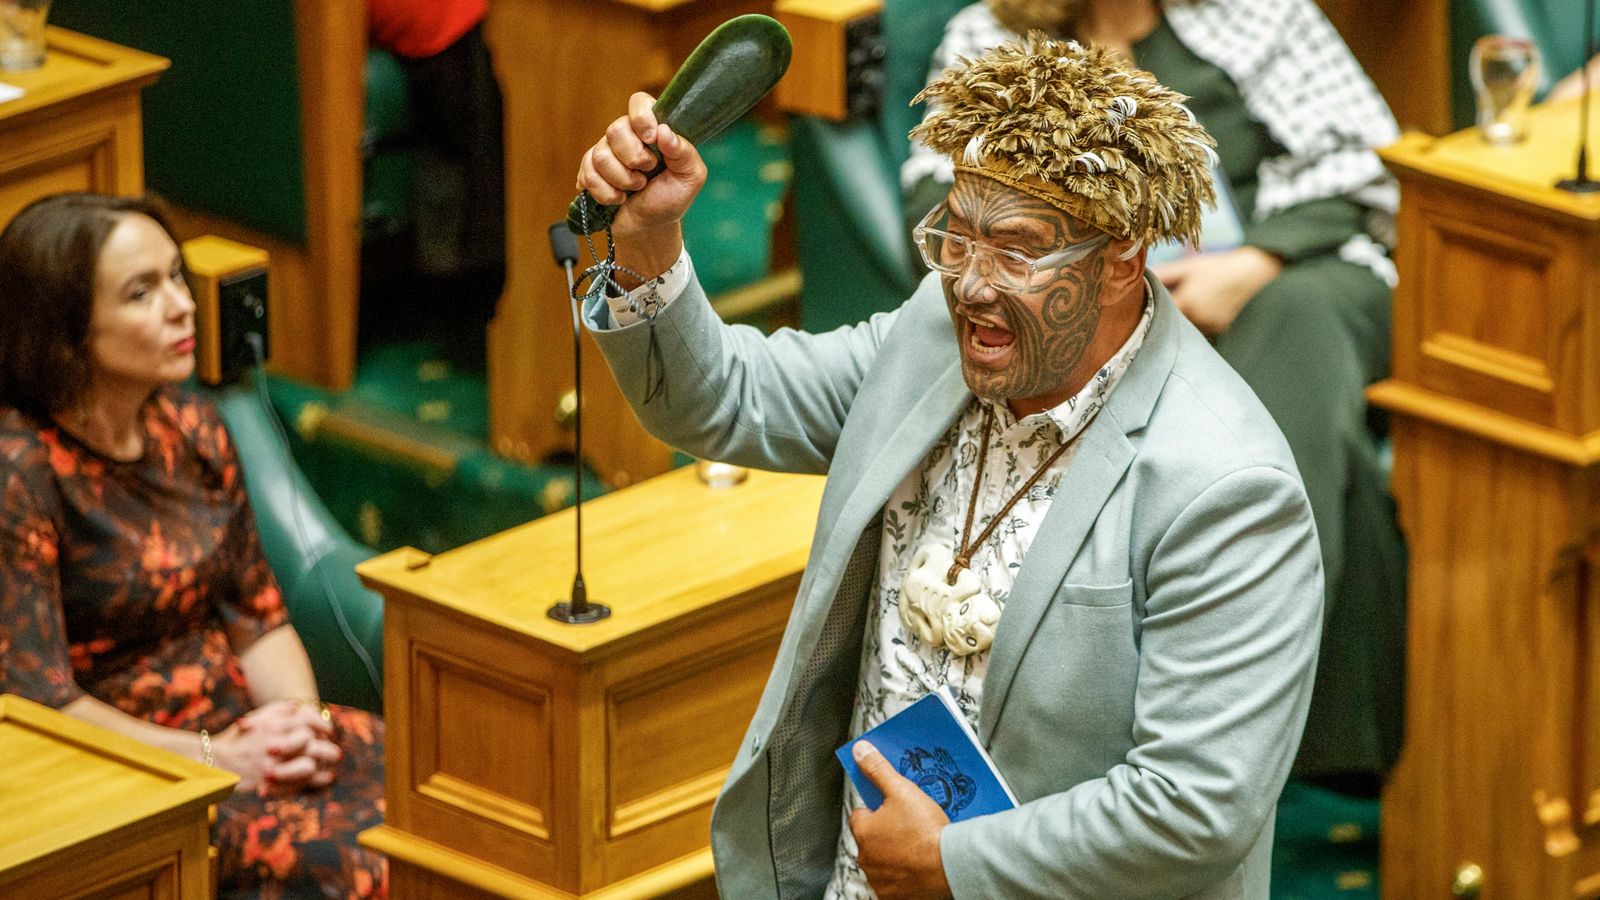 'Charles' or 'skin rash'? - Maori MPs in New Zealand go off script while swearing oath of allegiance to King